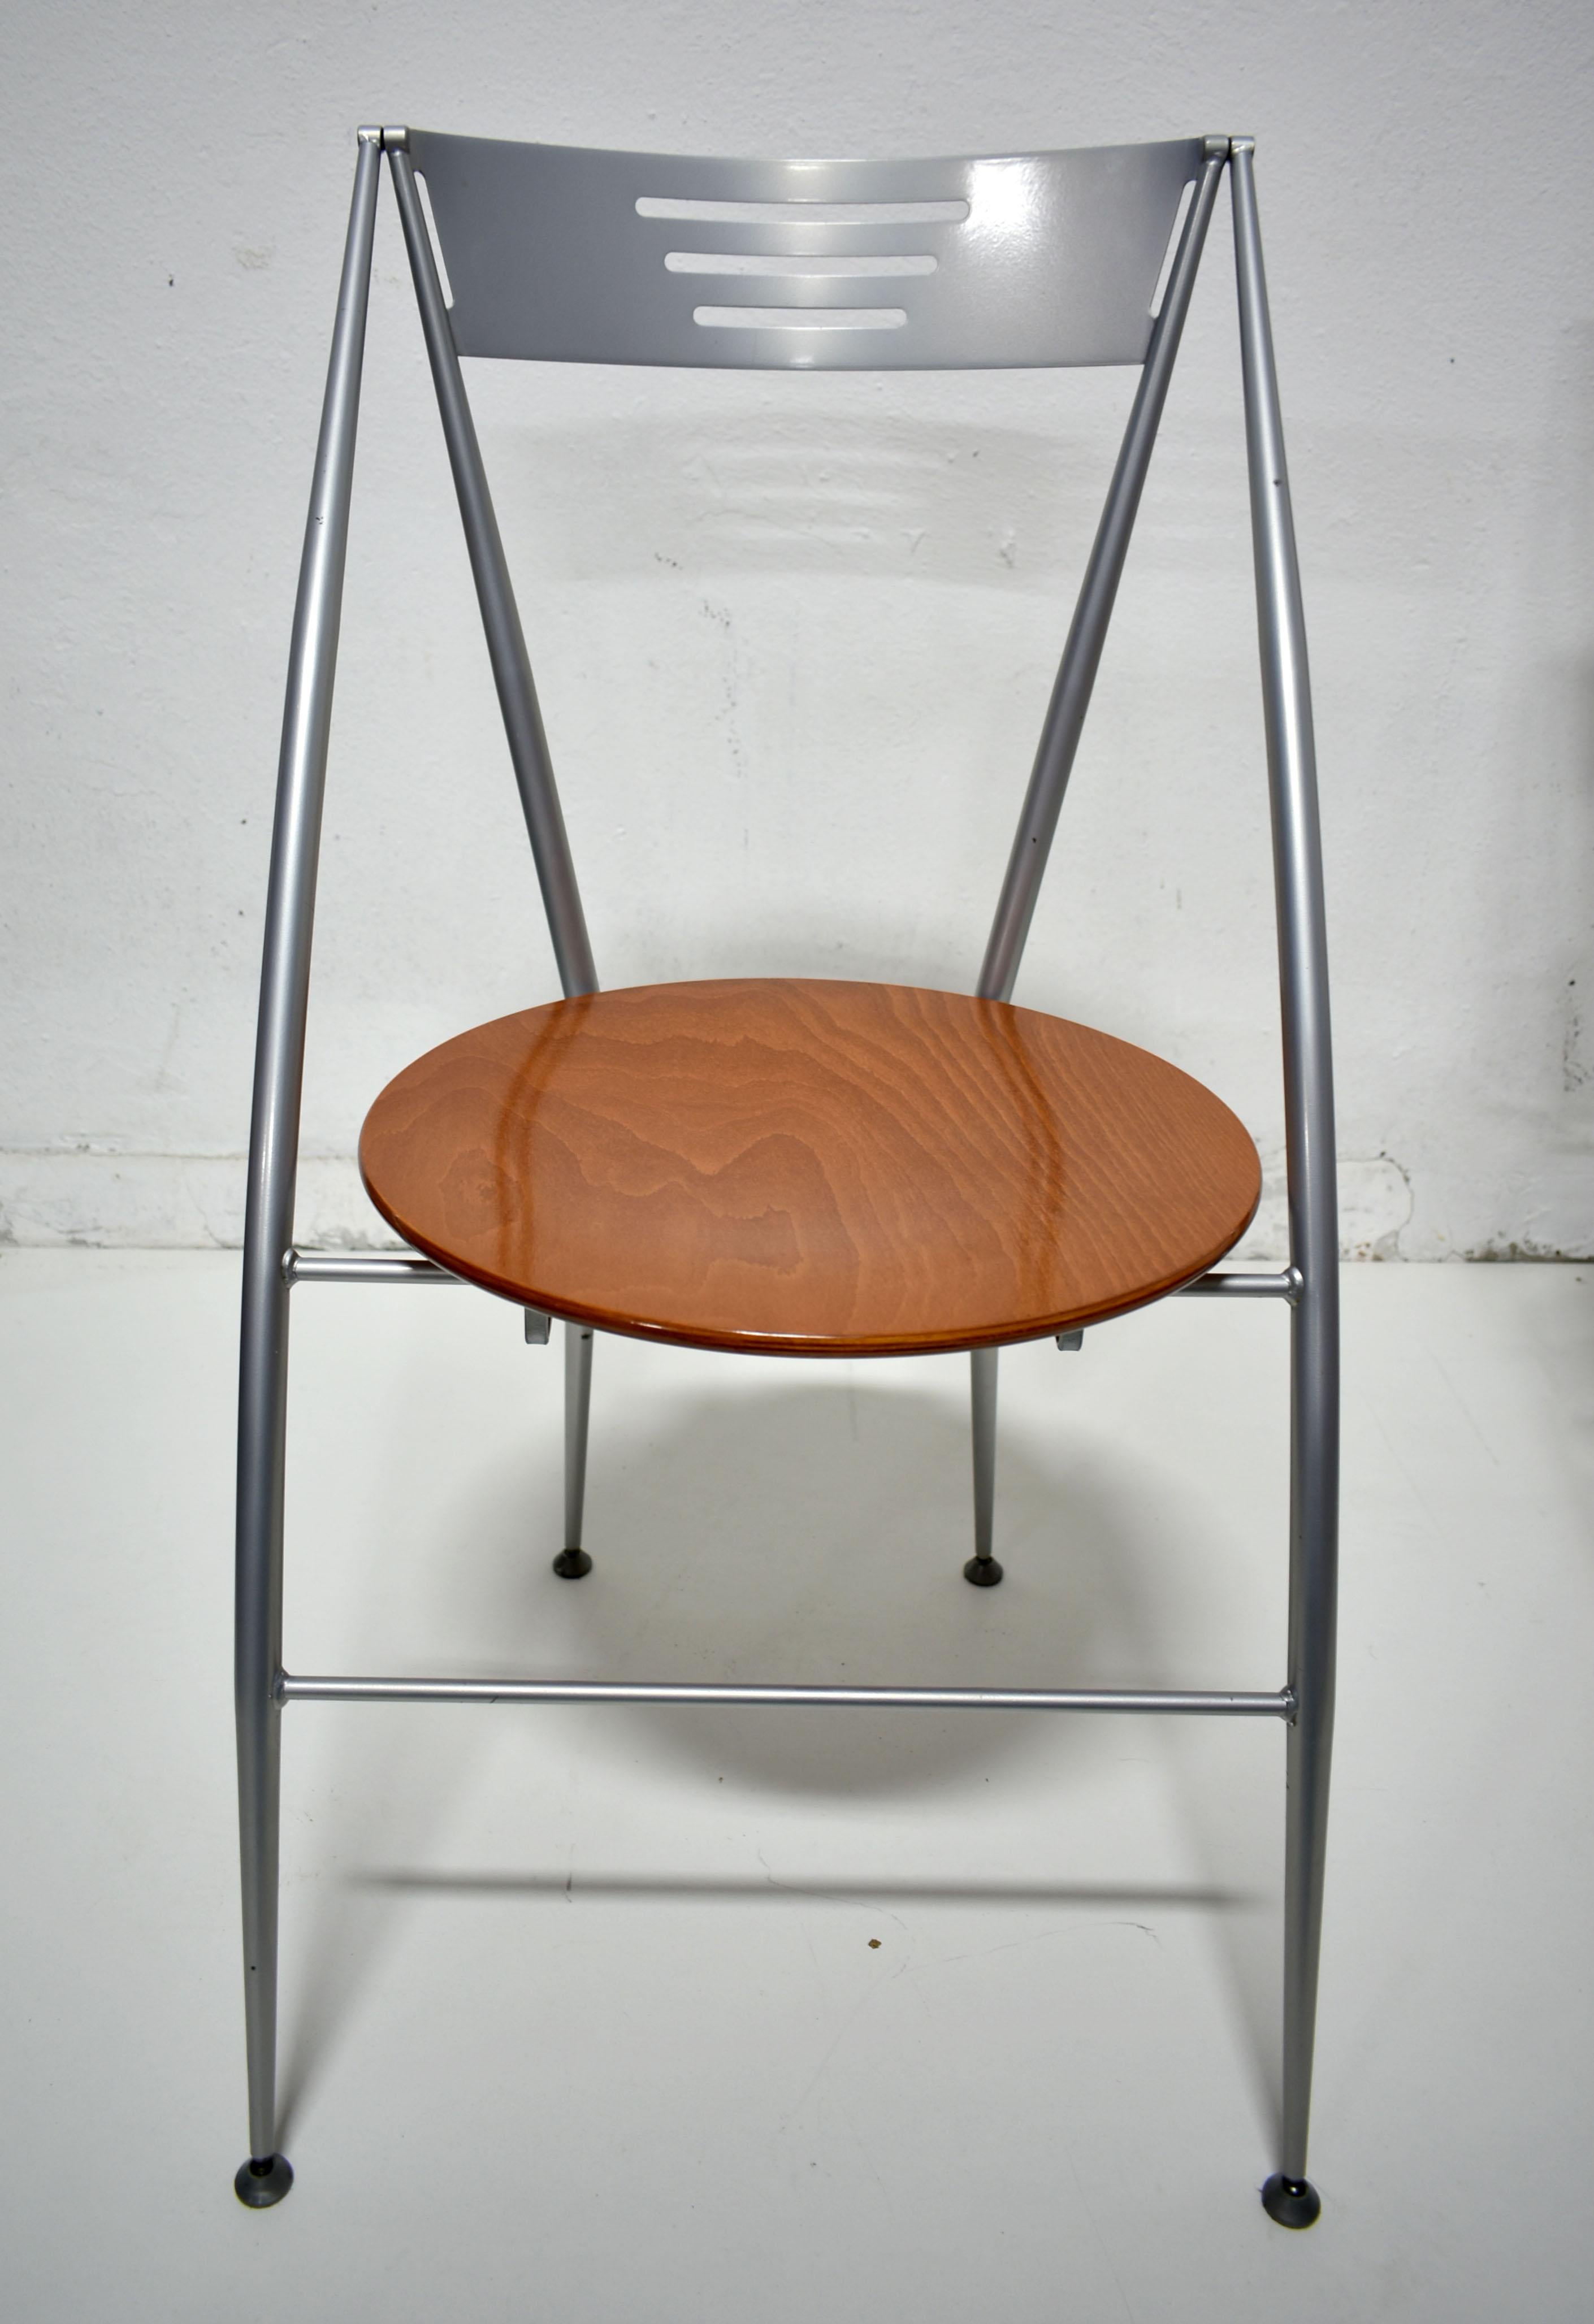 Vintage Italian designer folding dining chair produced in the 1980s by Calligaris

Very elegant postmodern design, the round-shaped seat is made of cherry wood, the frame is made of aluminum

The condition of the chair is very good vintage with